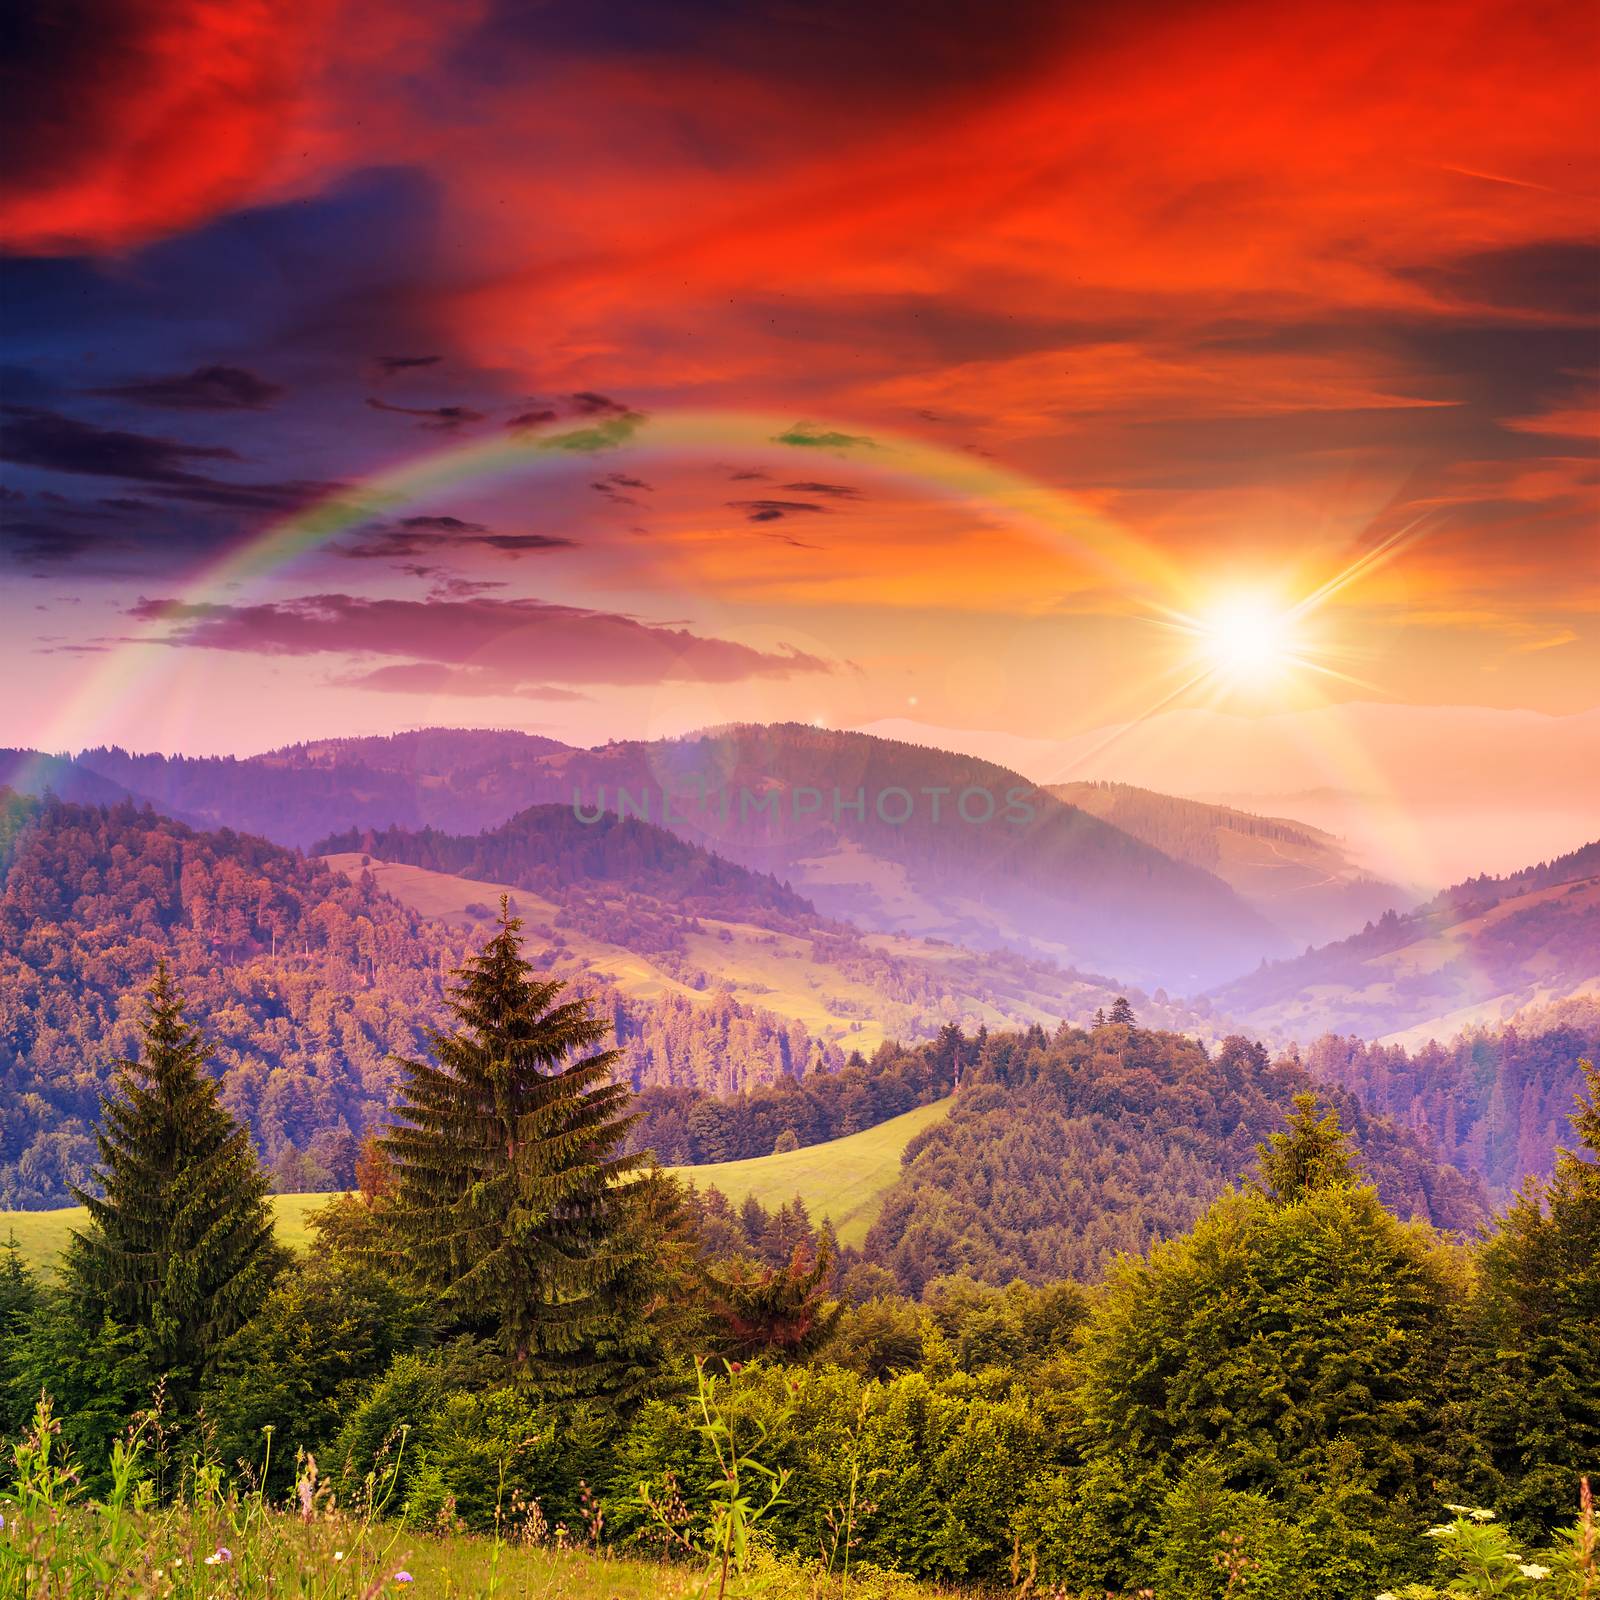 rainbow in coniferous forest on a steep mountain slope at sunset by Pellinni